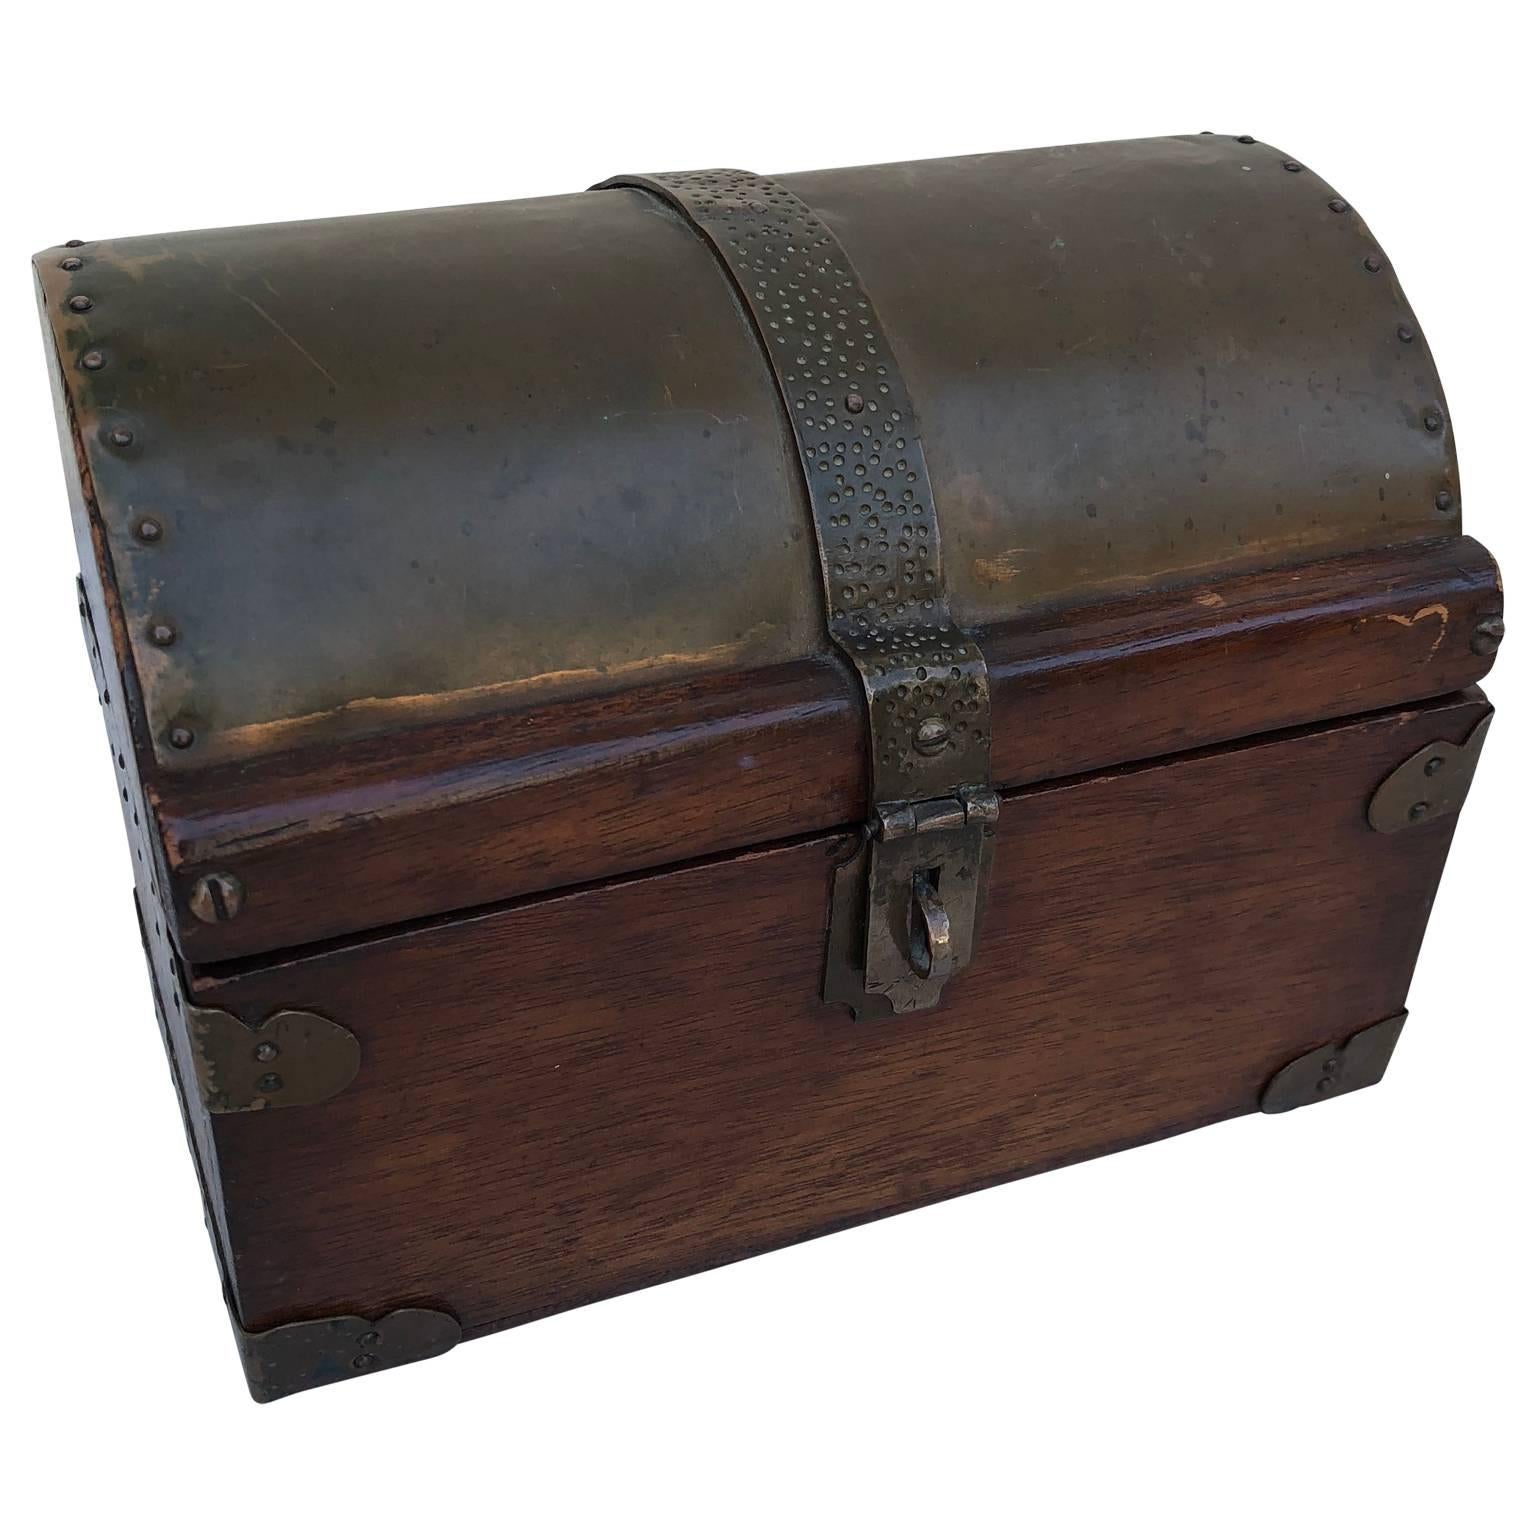 Hand-Crafted Small Brass and Copper Plated Wooden Jewelry Casket